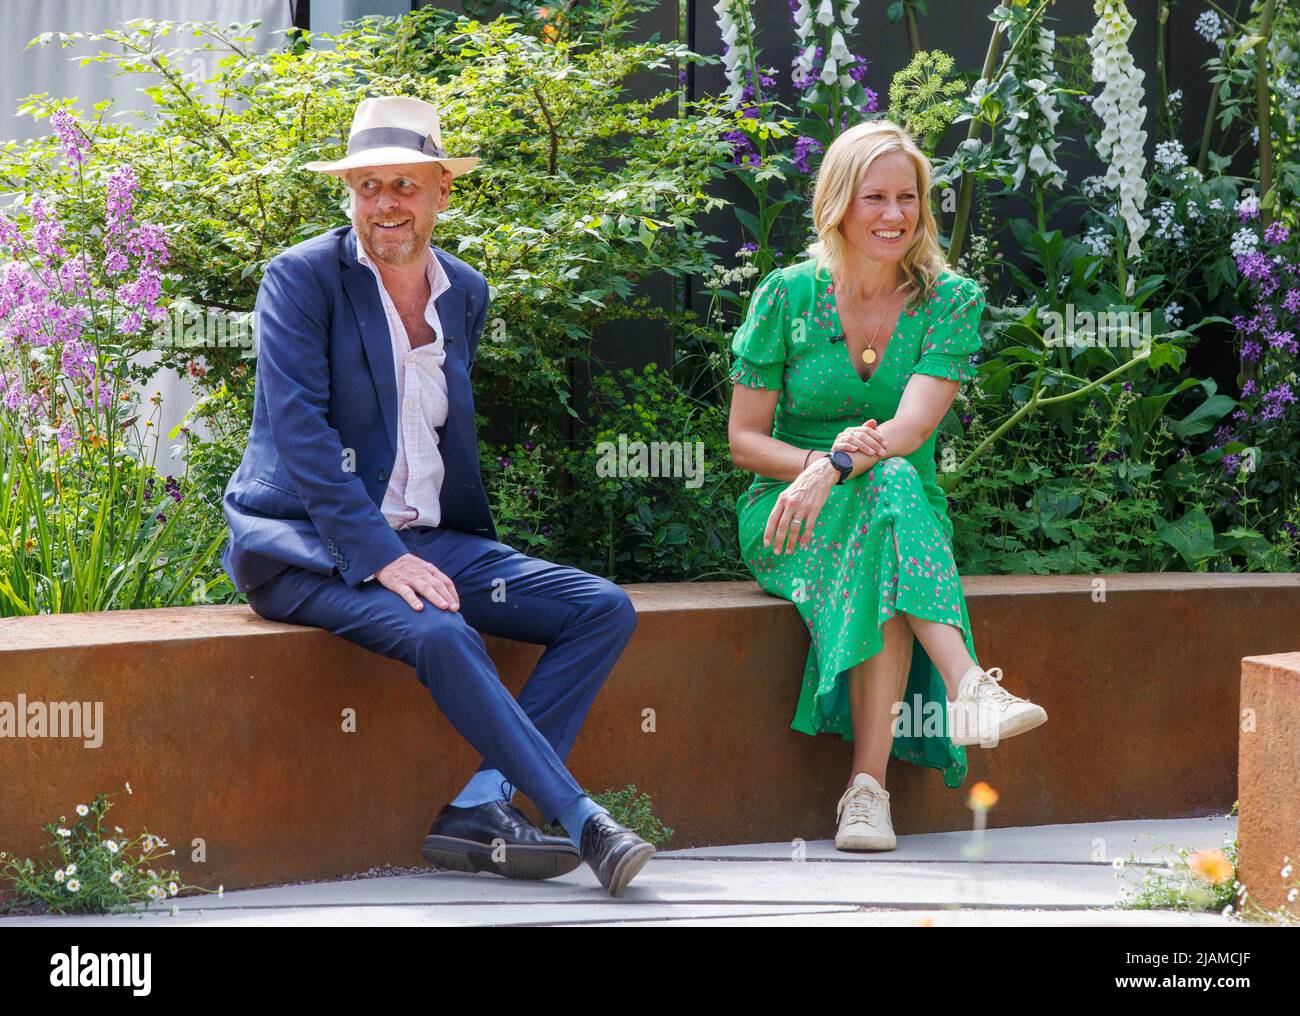 Joe Swift, garden expert, designer and television presenter with TV newsreader and Journalist, Sophie Raworth, at the RHS Chelsea Flower Show Stock Photo